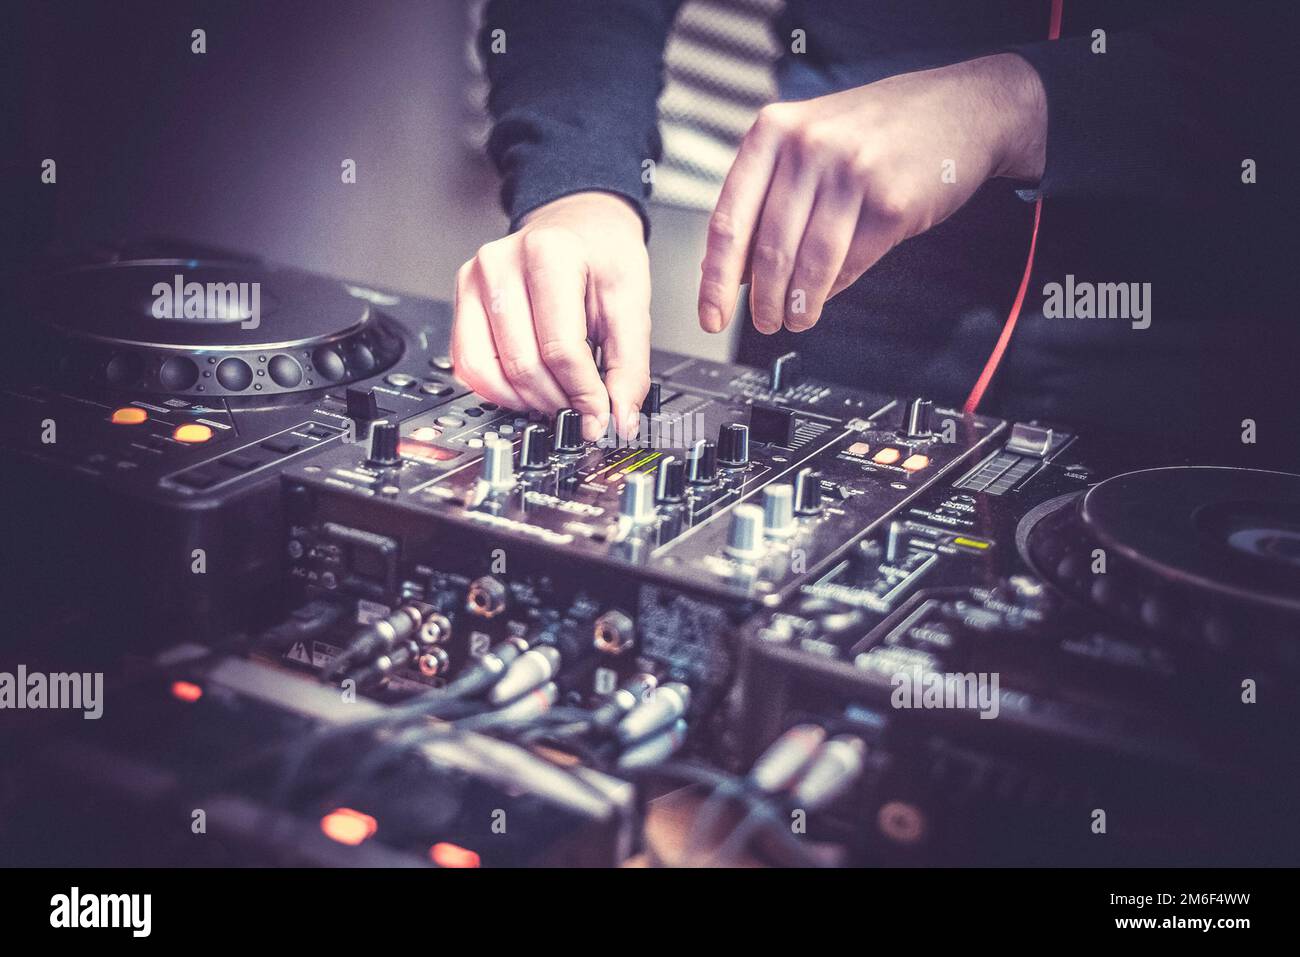 DJ at the remote control. Mixer remote at concert. Musical equipment. Stock Photo